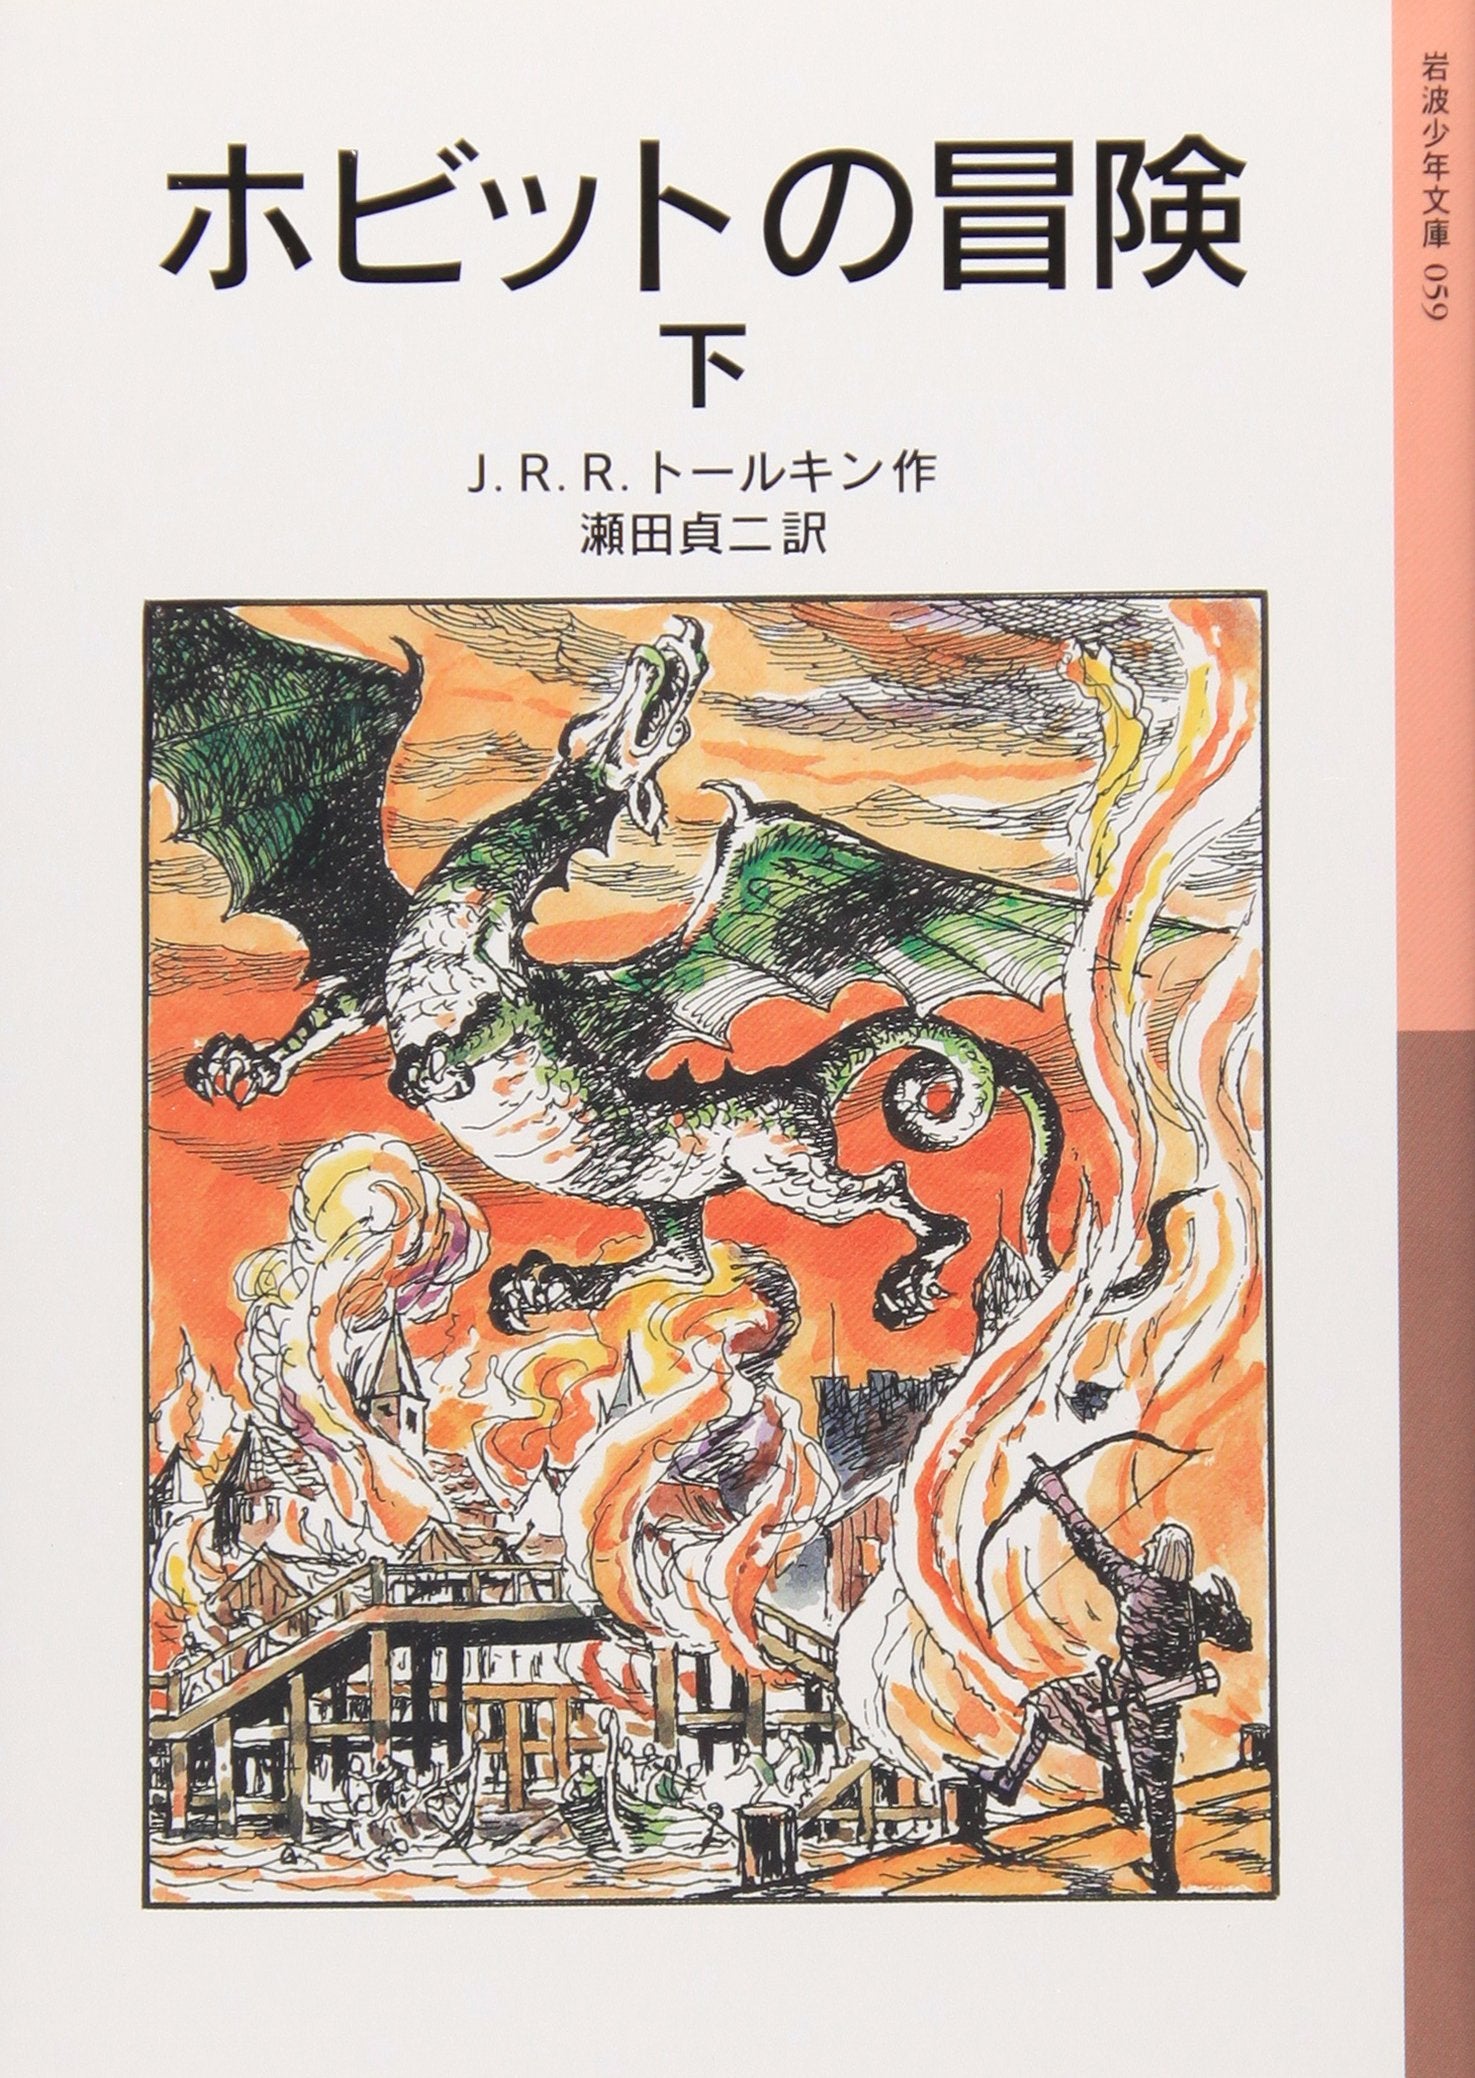 The Hobbit Vol. 2 of 2 (Japanese Edition)